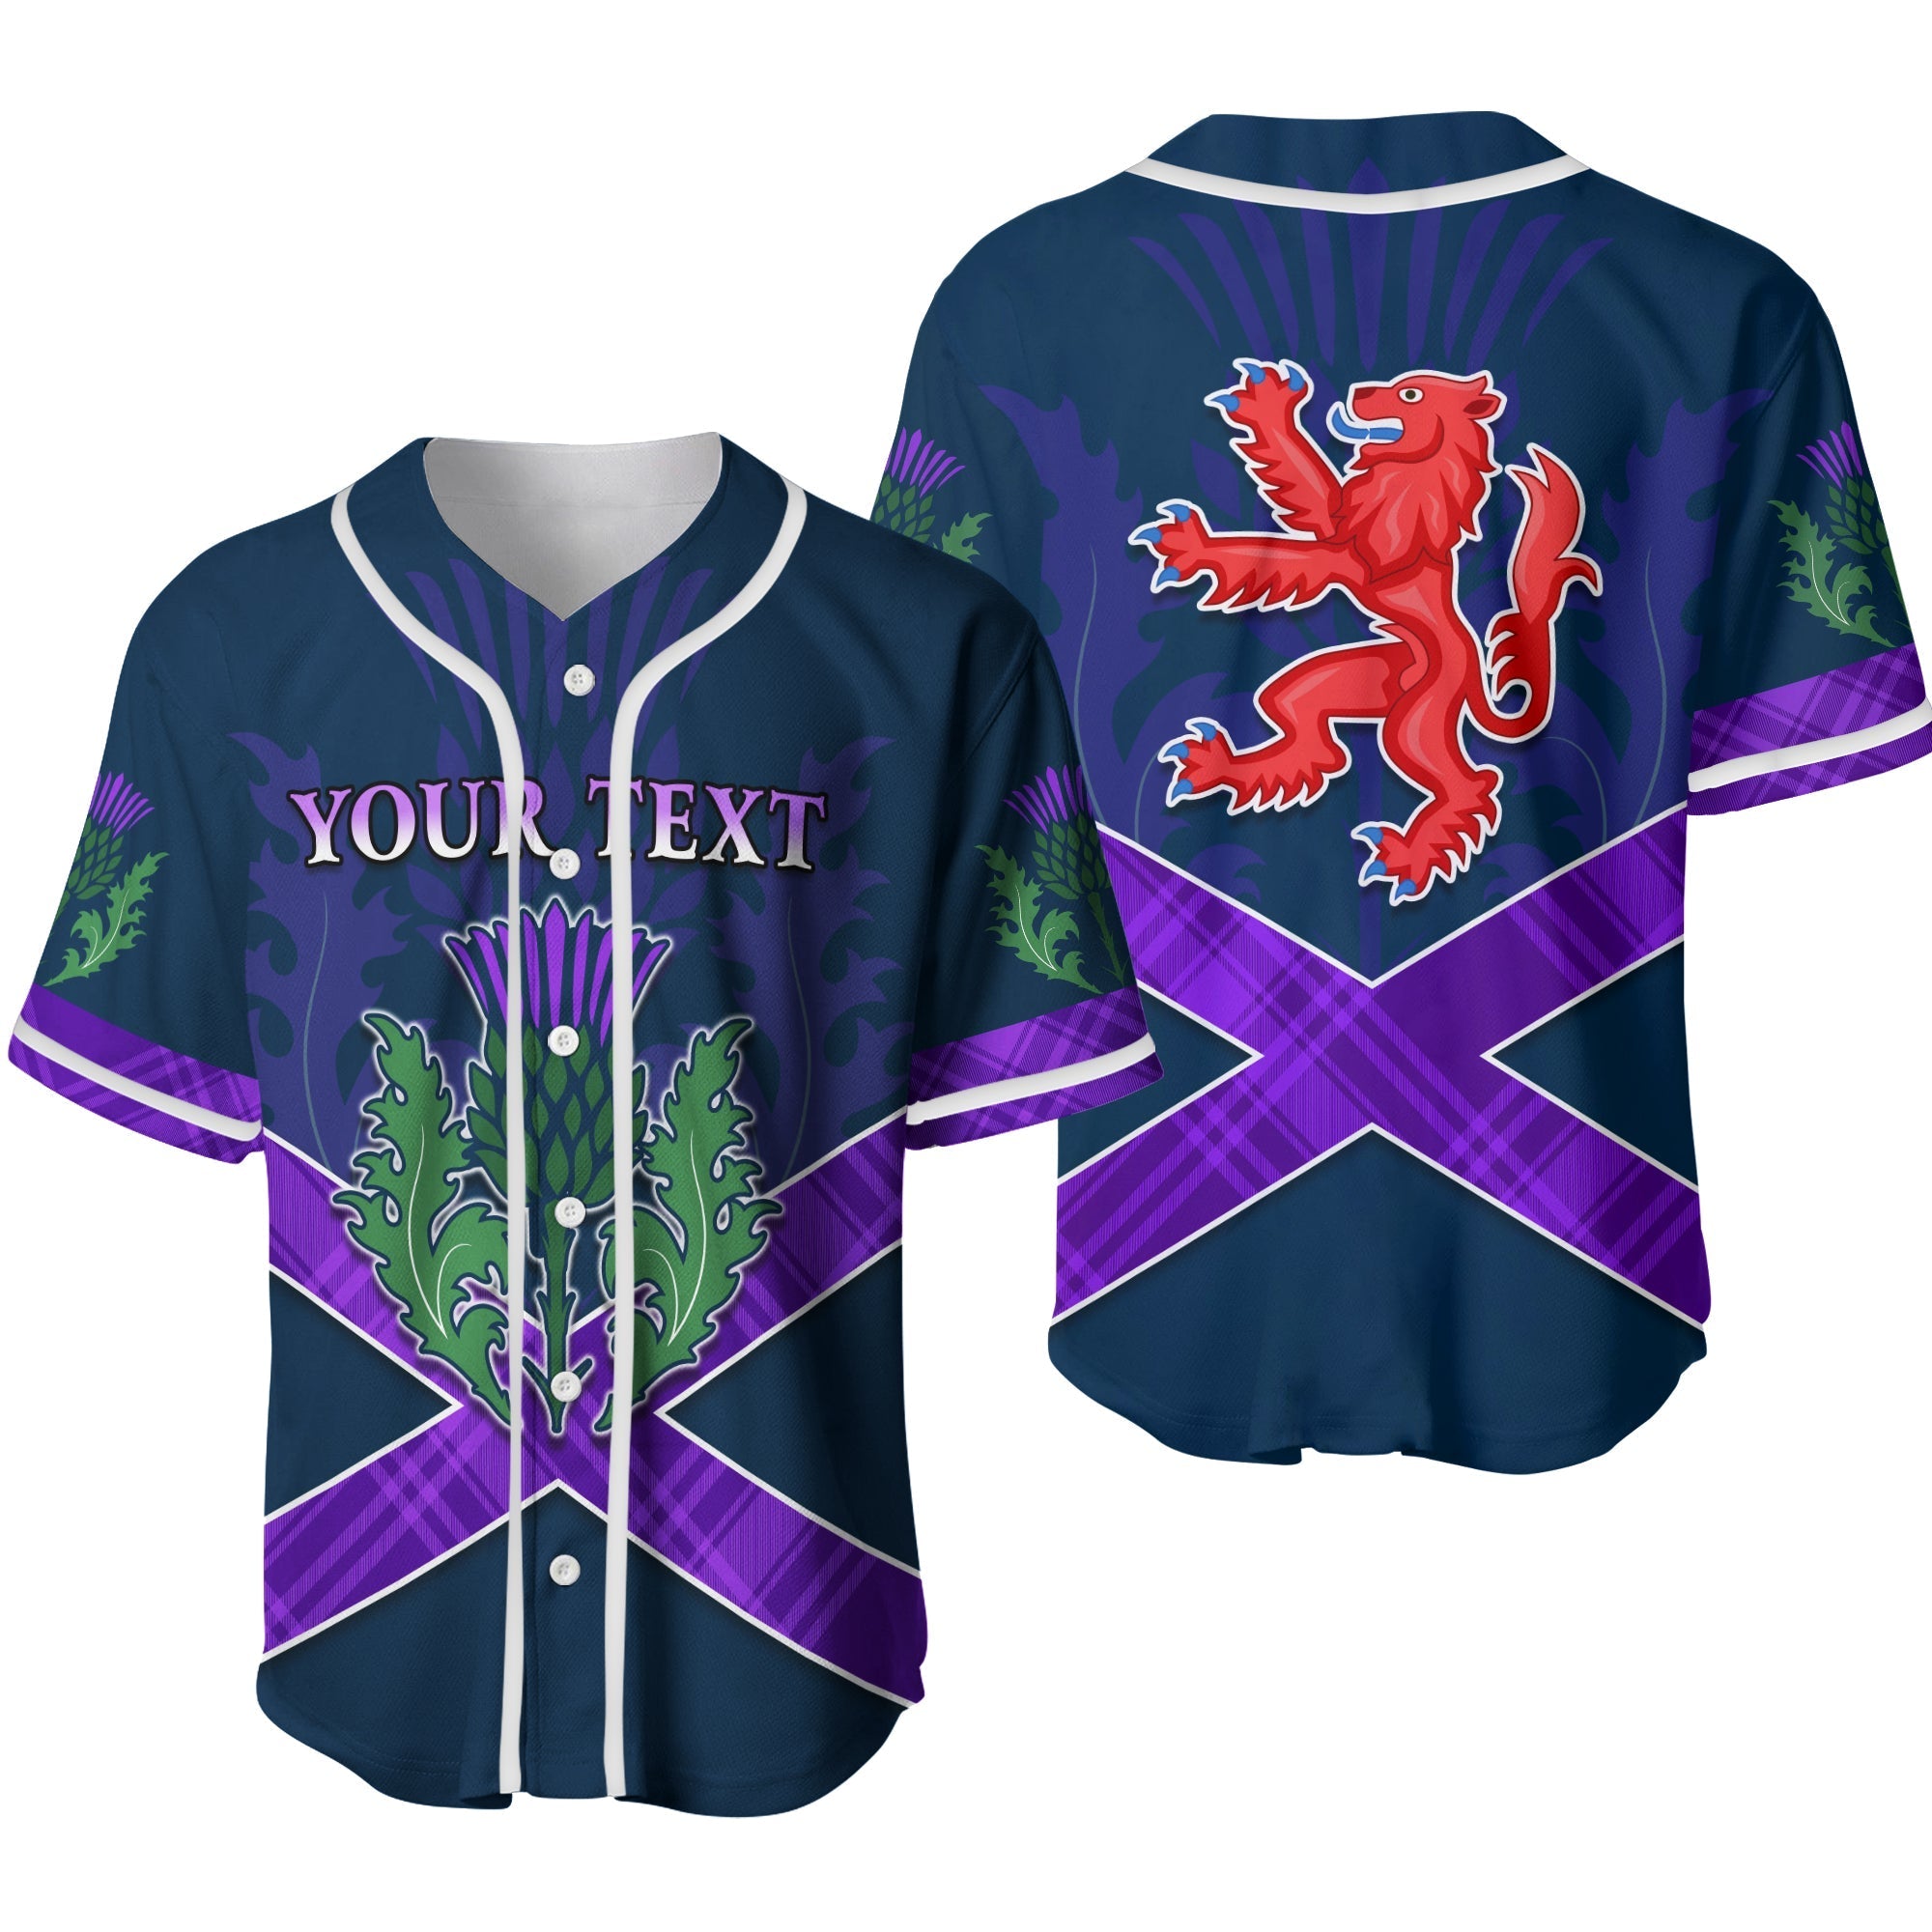 custom-personalised-scotland-rugby-2021-baseball-jersey-thistle-six-nations